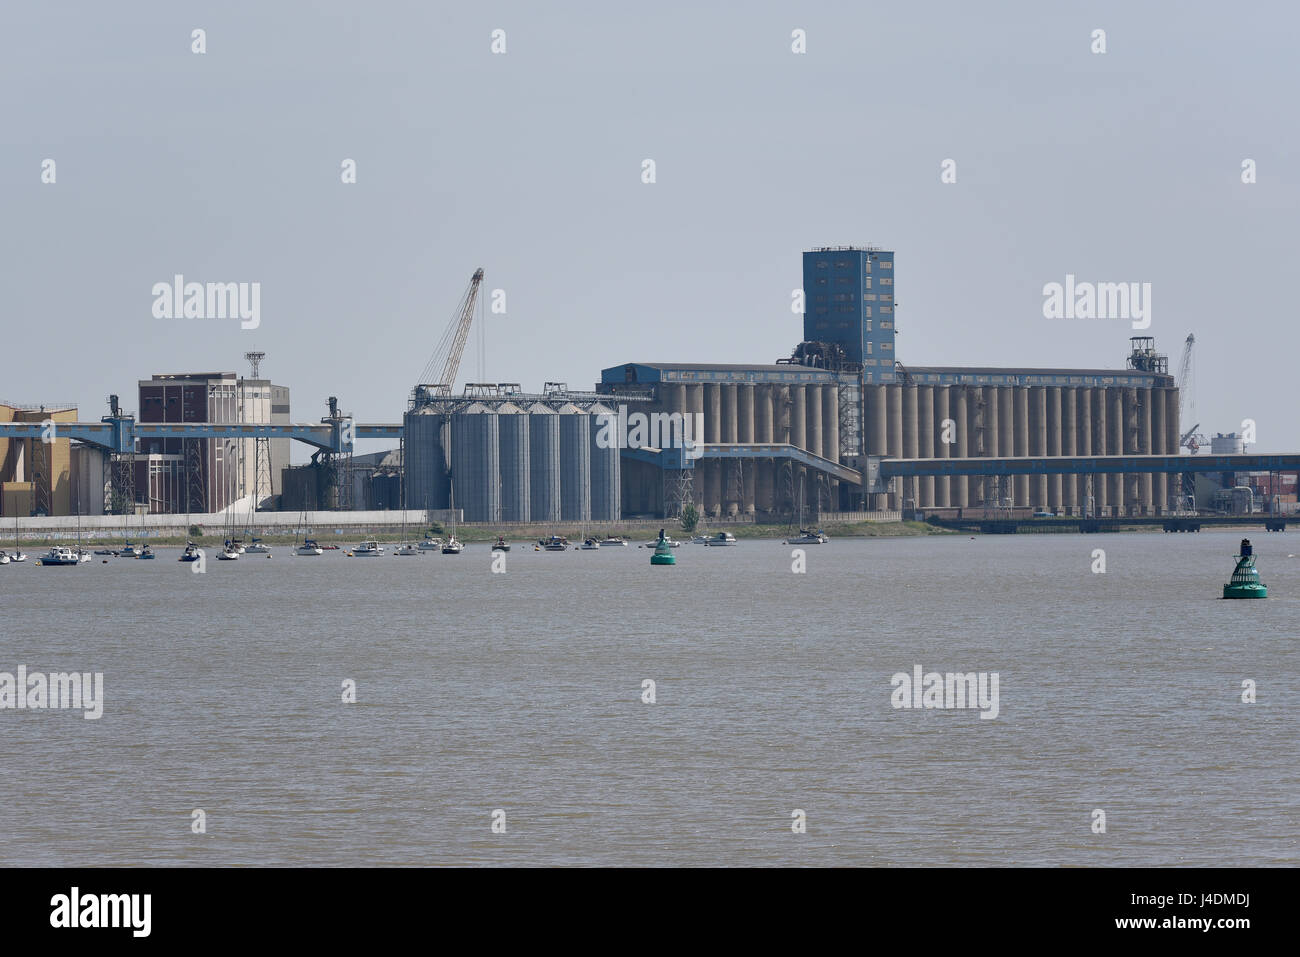 Thames Grain Elevators Grain Terminal in Tilbury Docks, on the River Thames in Essex, with storage silos Stock Photo